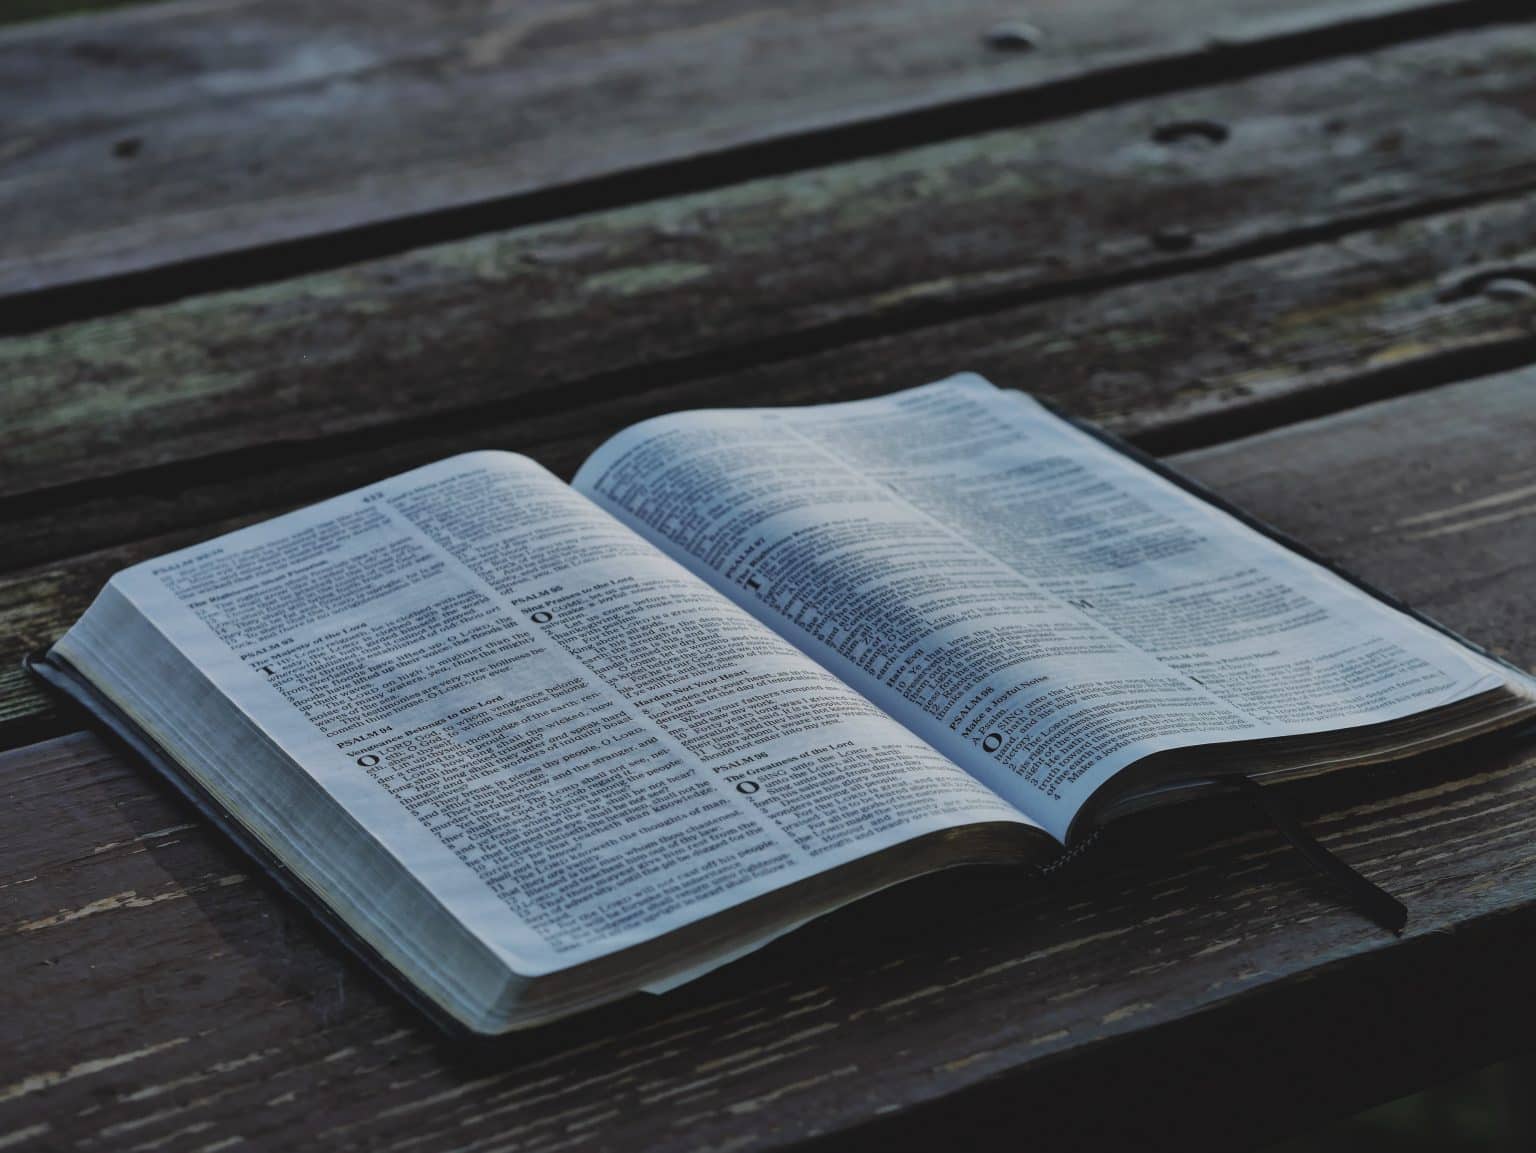 dangers of taking scripture out of context